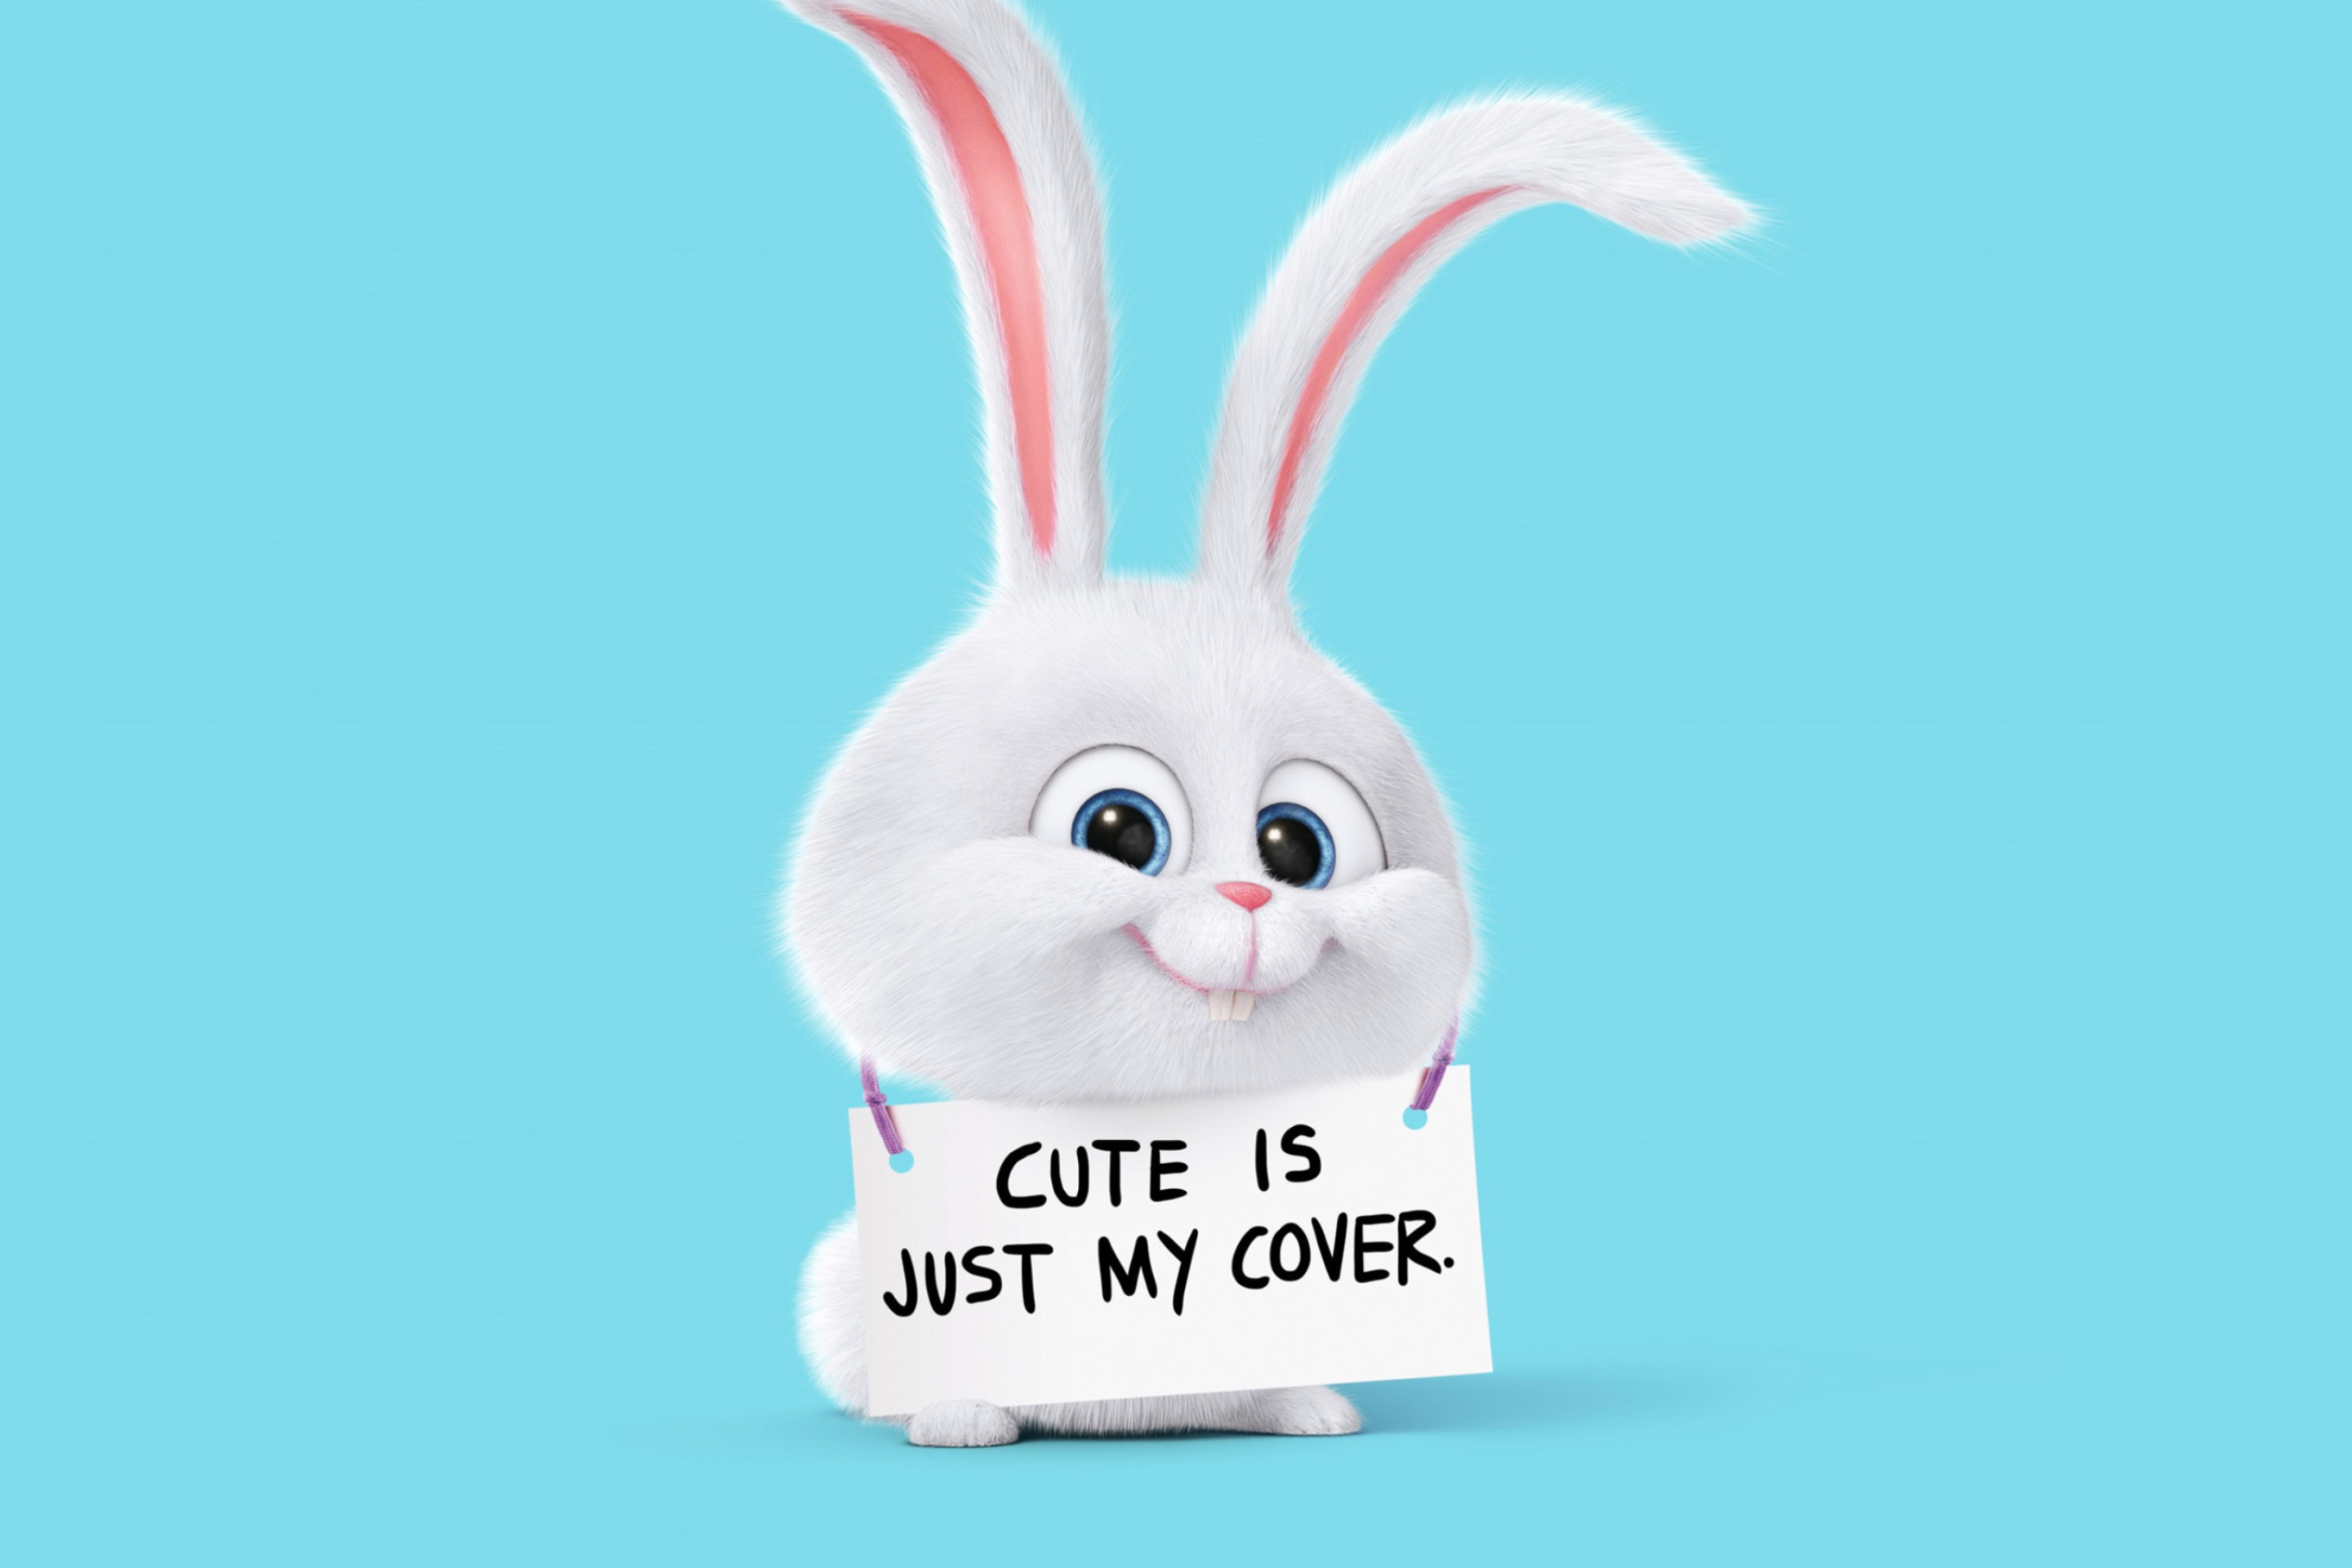 Snowball from The Secret Life of Pets wallpaper 2880x1920